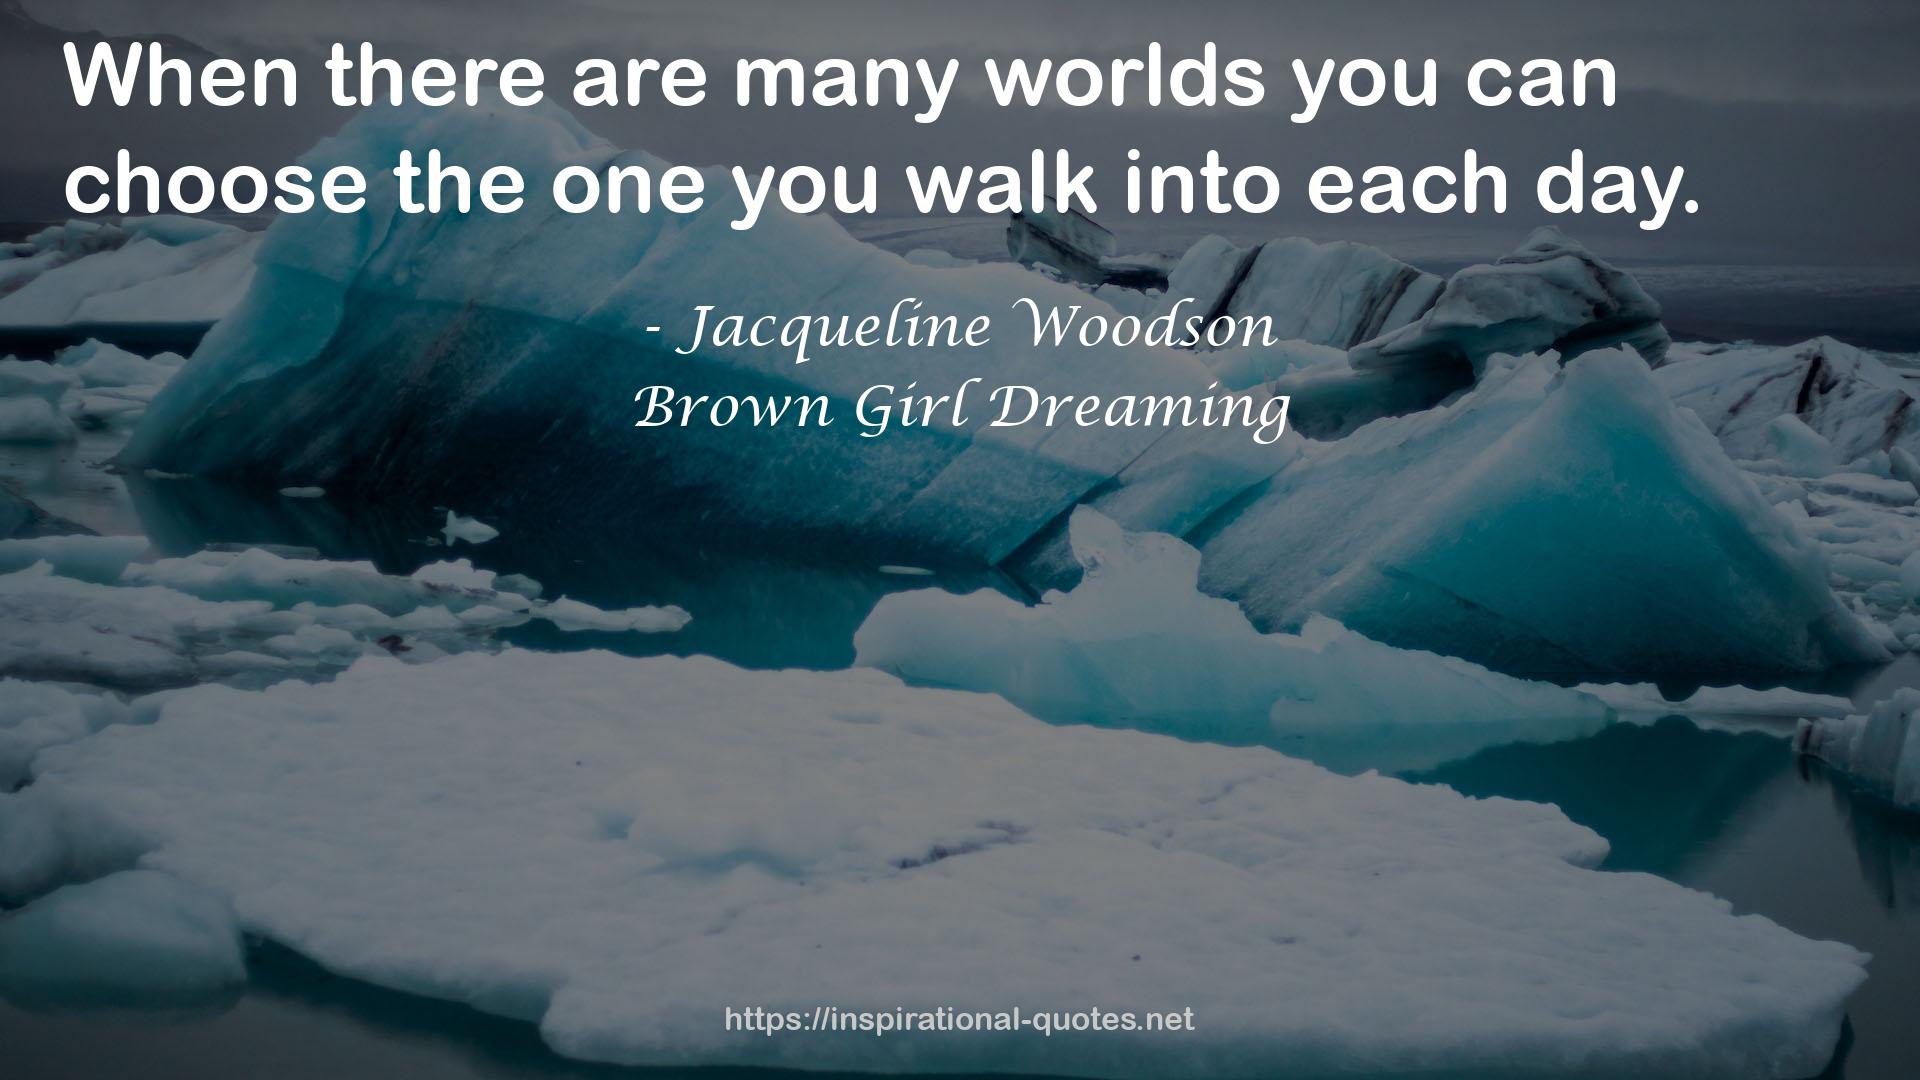 Brown Girl Dreaming QUOTES